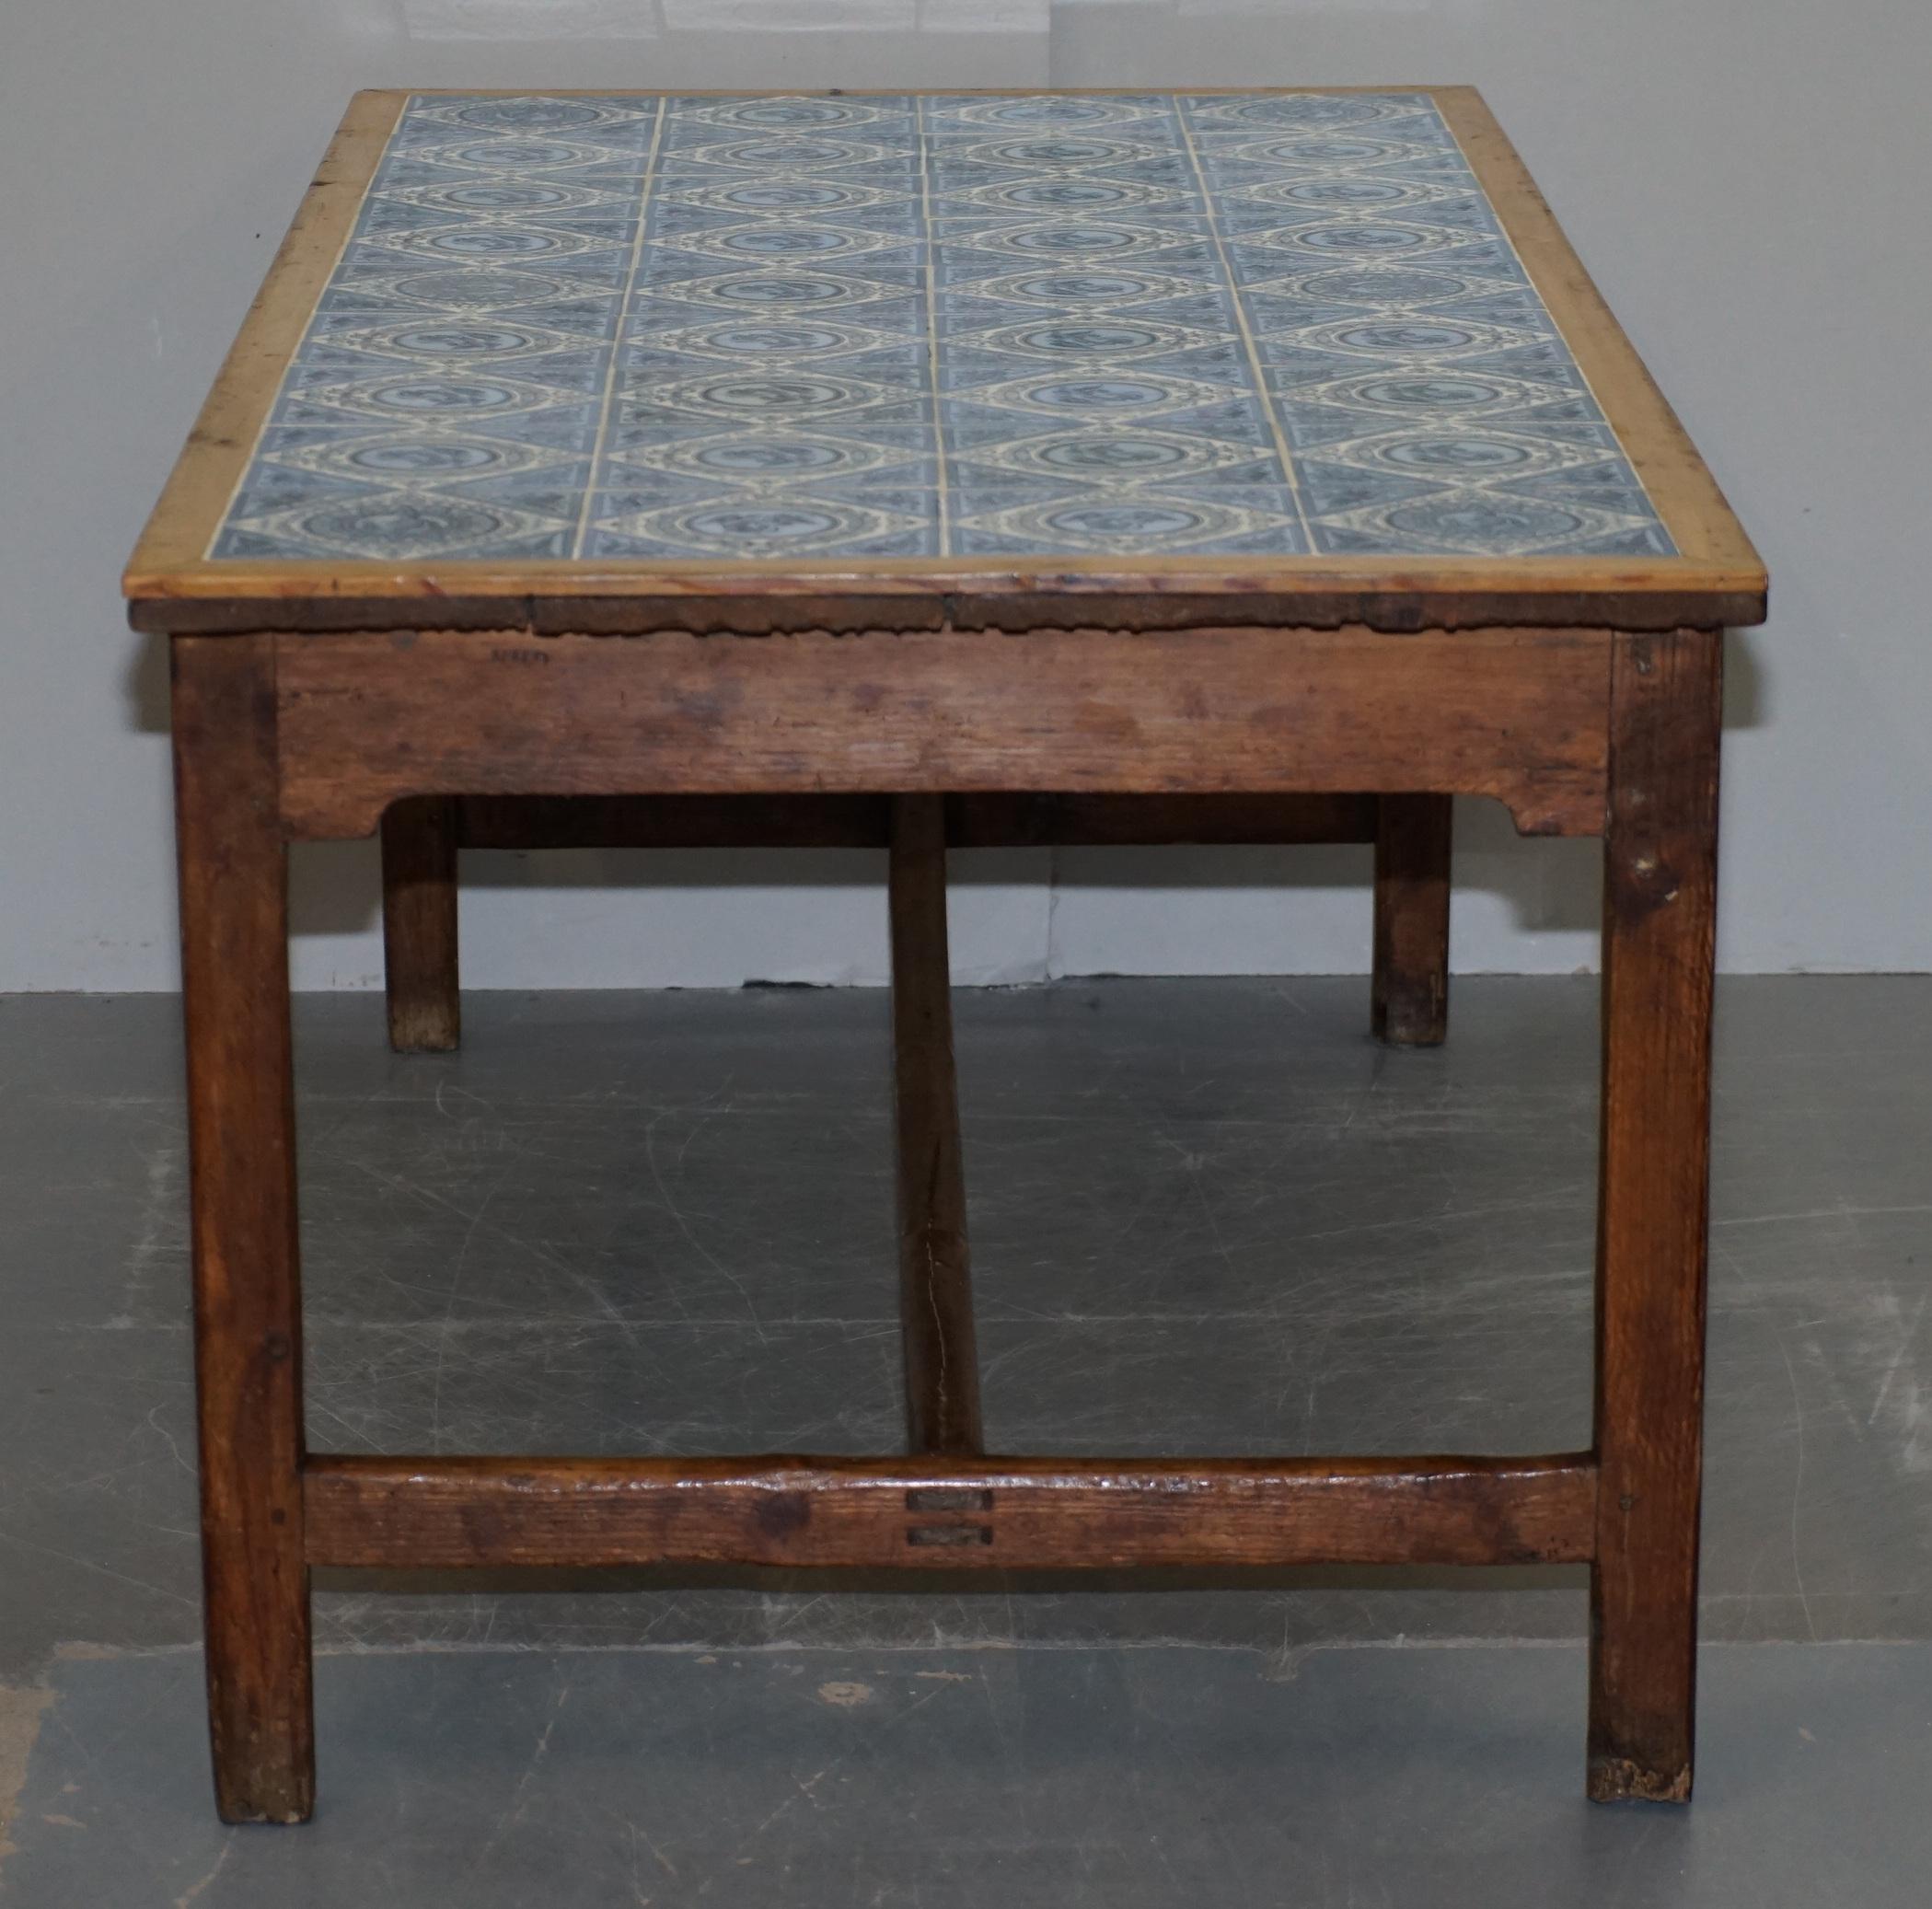 Antique Victorian Tiled Refectory Dining Table Stunning English Country House 3